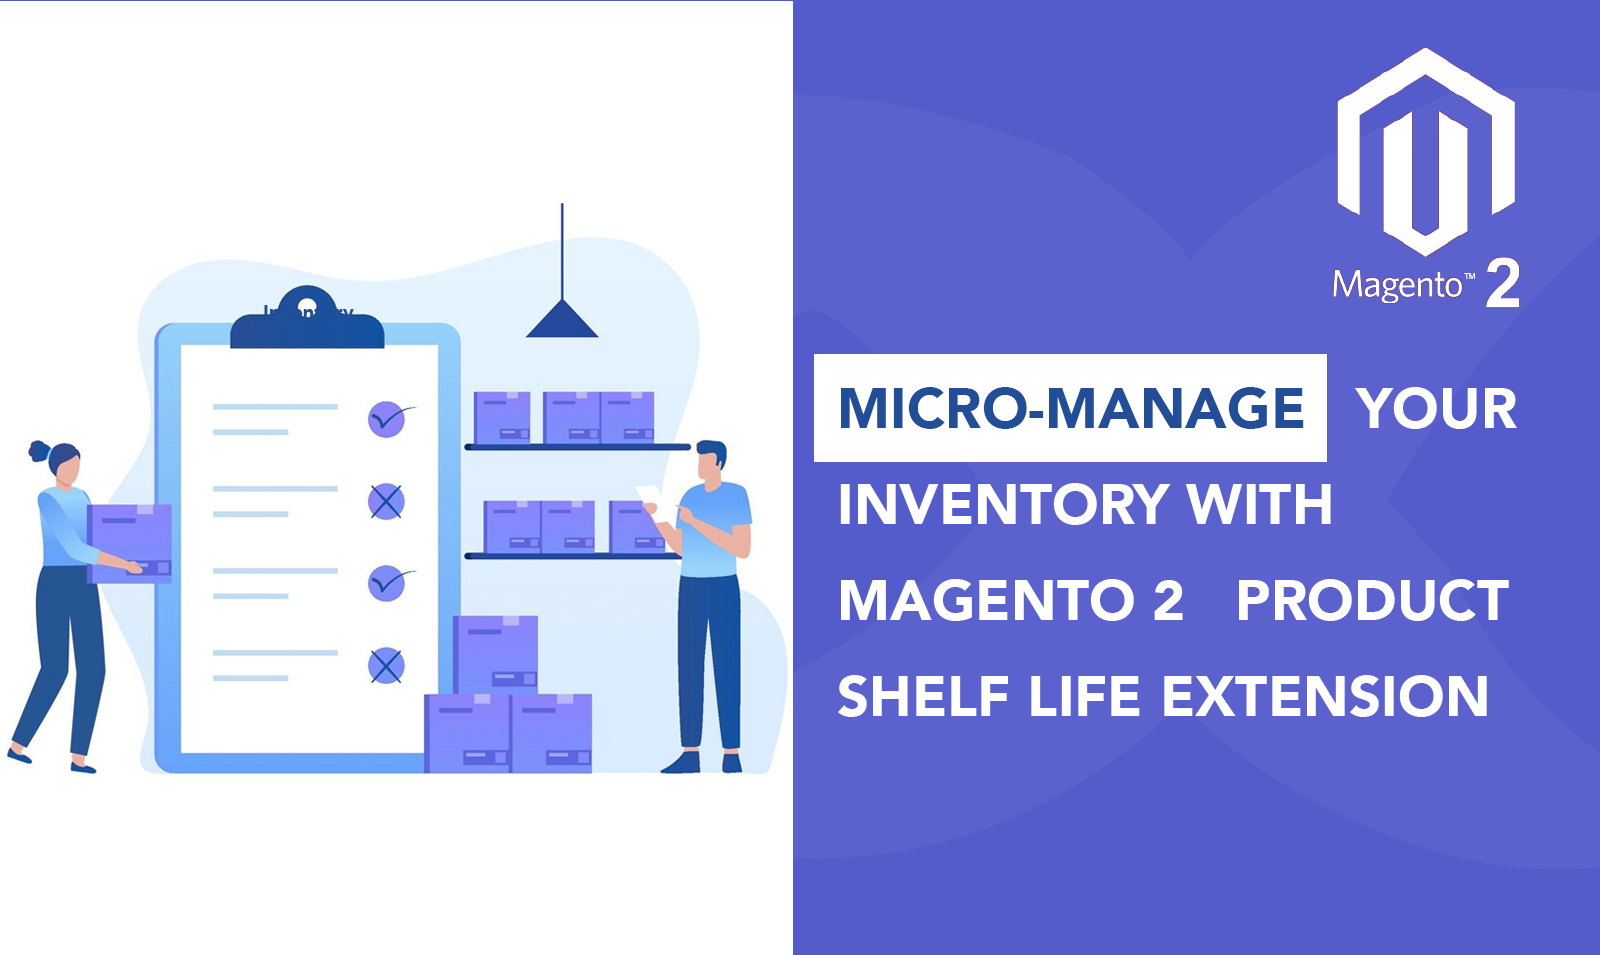 Micro-Manage Your Inventory with Magento 2 Product Shelf Life Extension